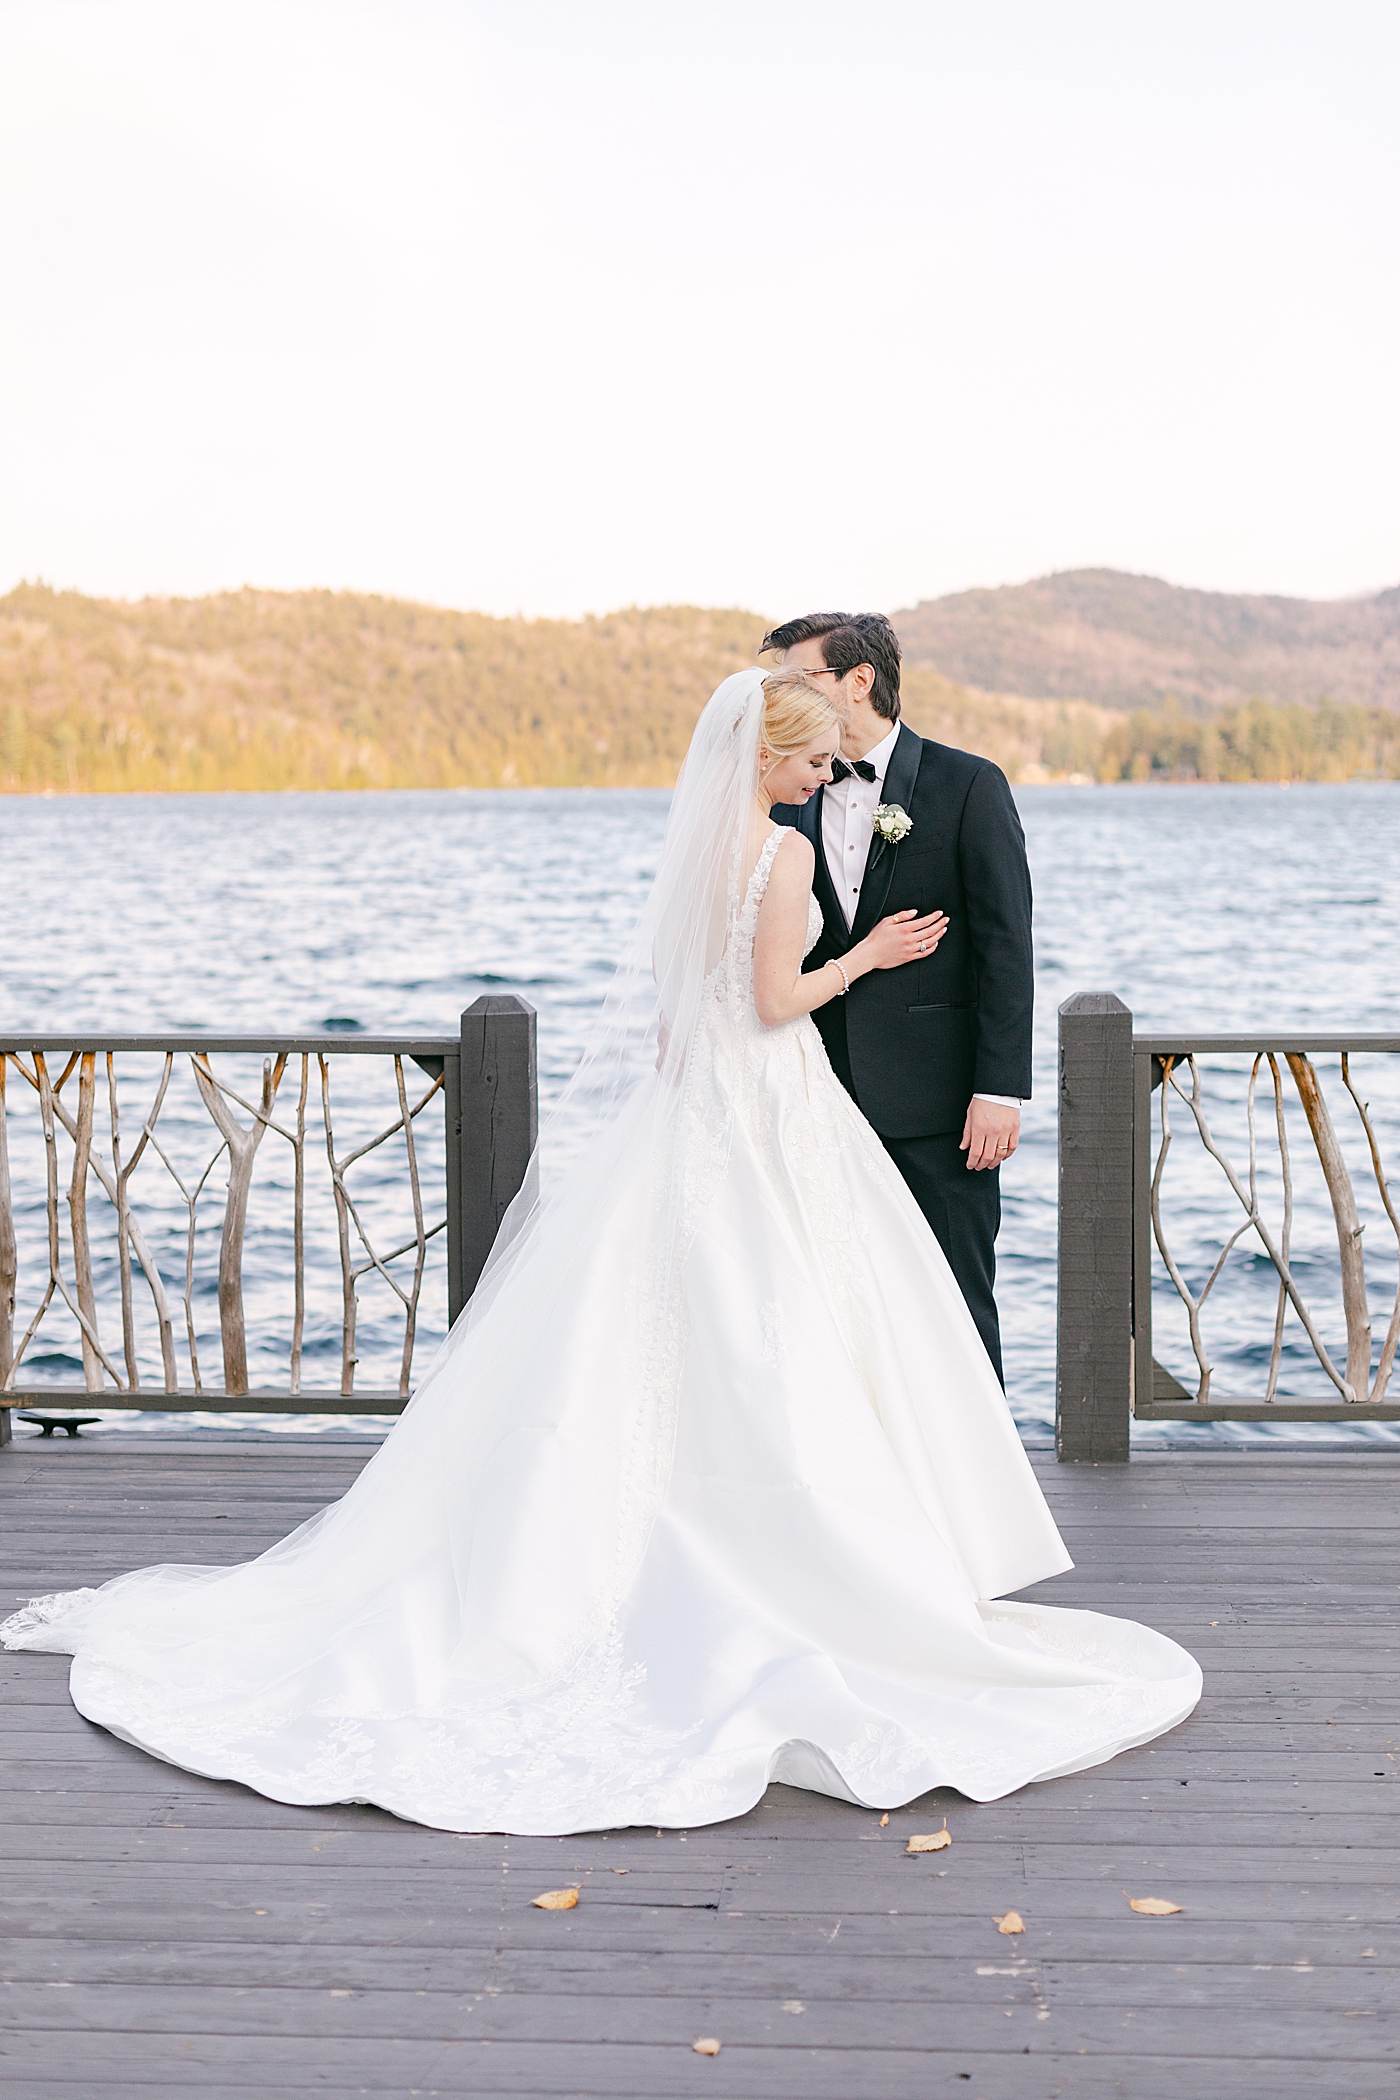 Bride and groom embracing on a dock | Image by Hope Helmuth Photography